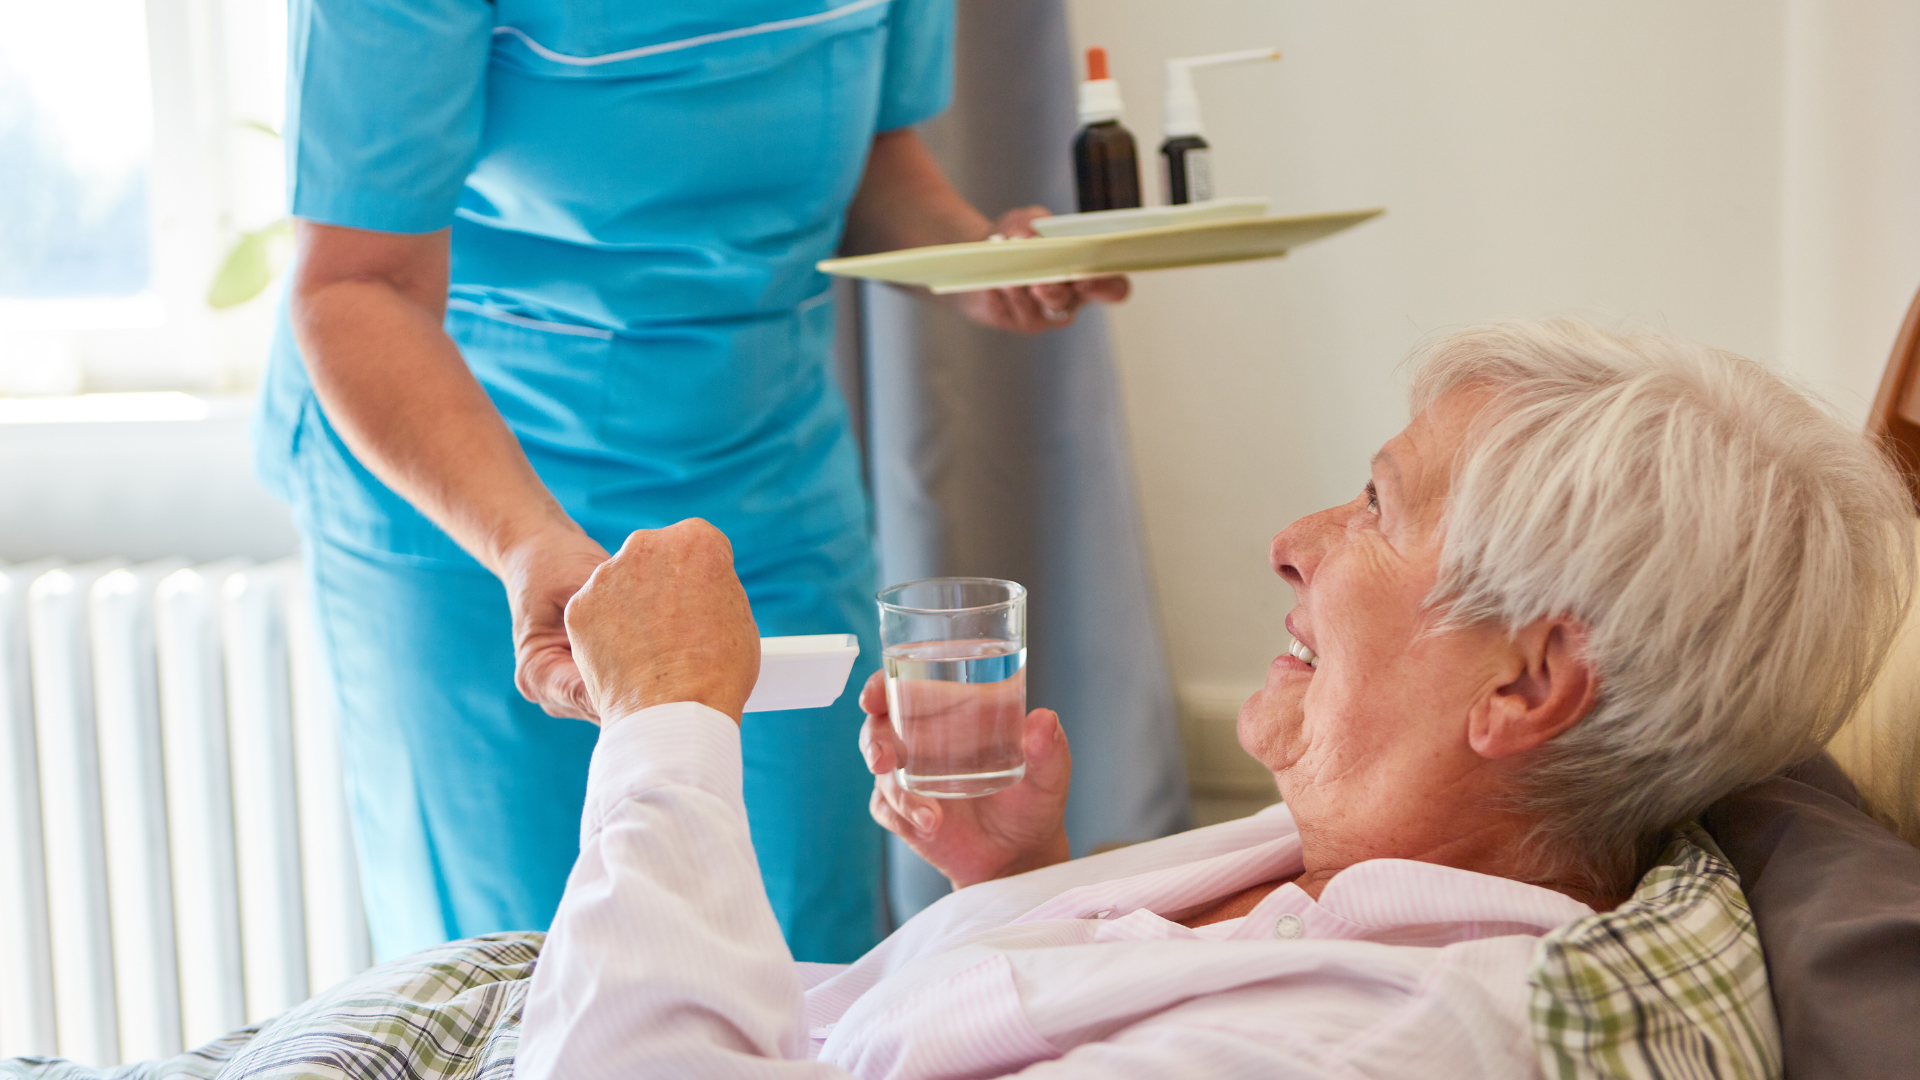 Long-term care resident happily accepts medication from a staff member who ensures her medication adherence